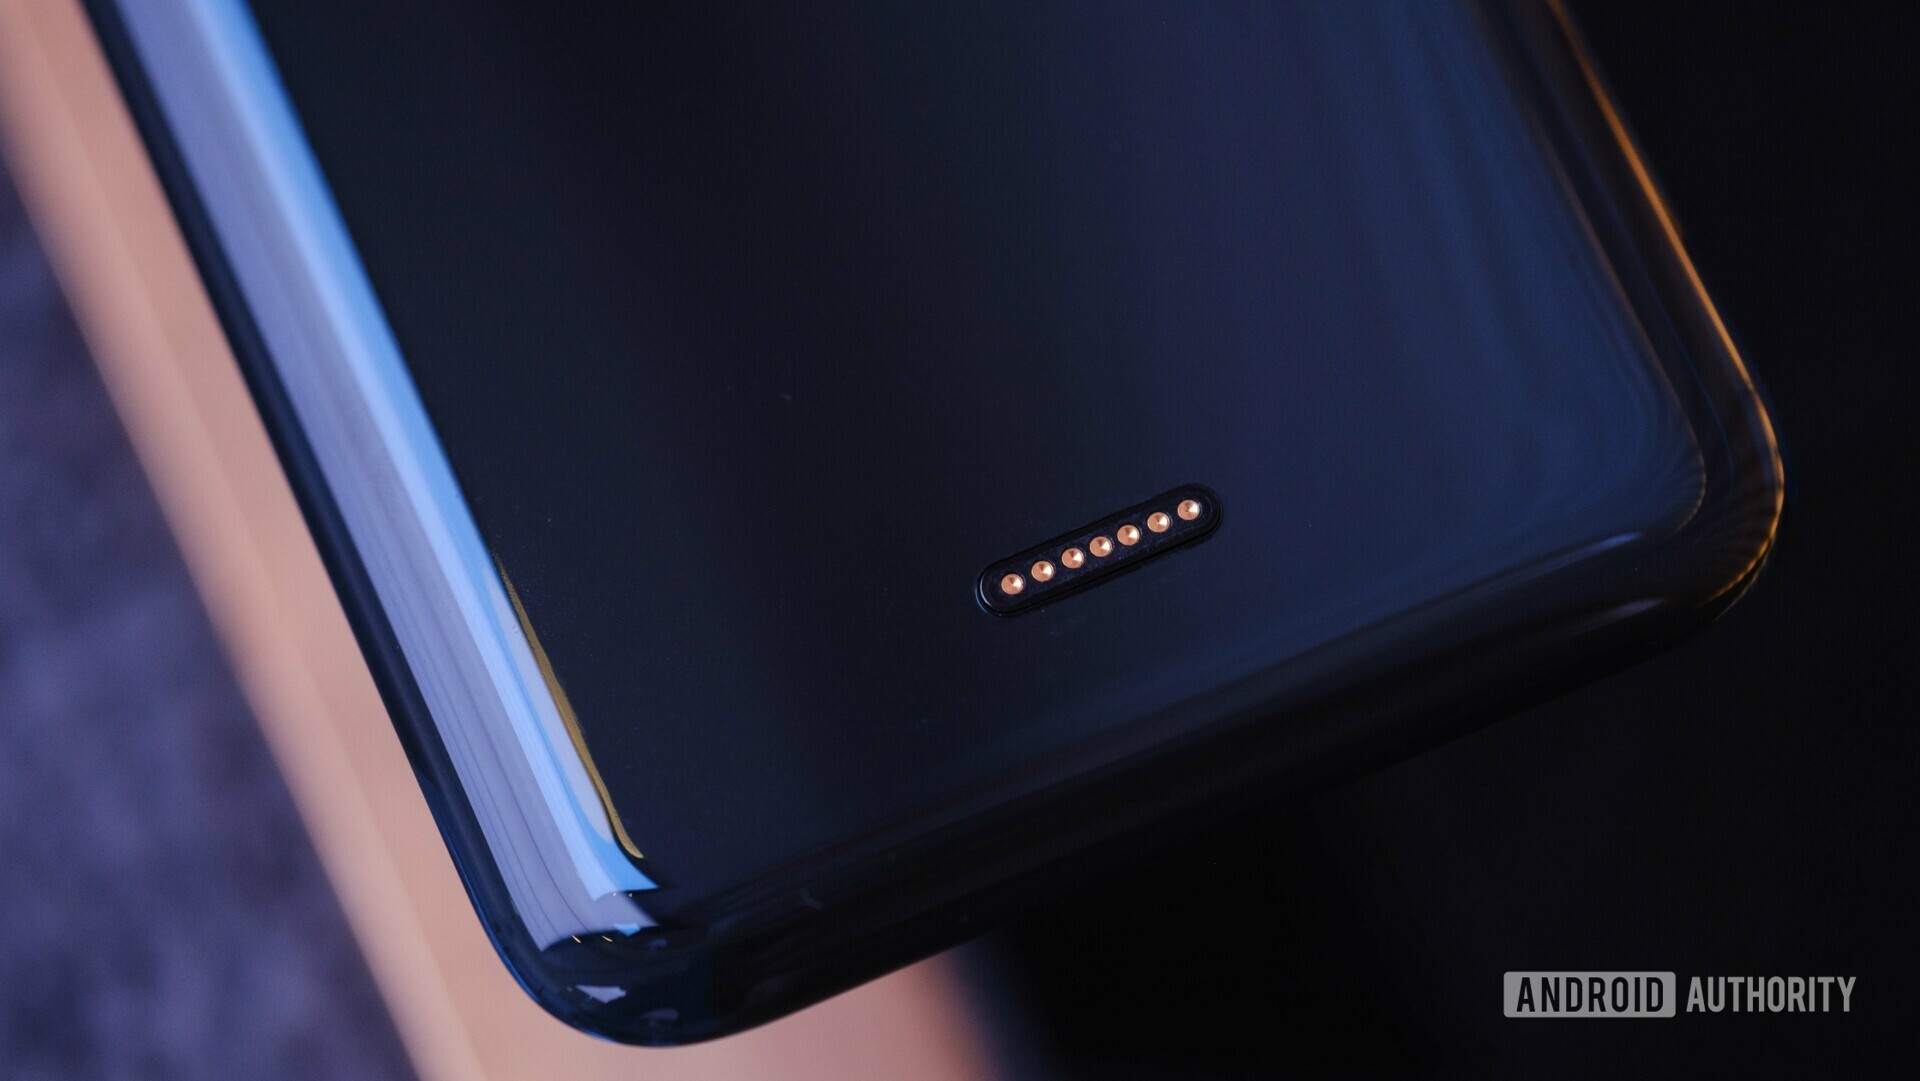 Backside of the vivo APEX 2019 concept focusing on the charging pins.